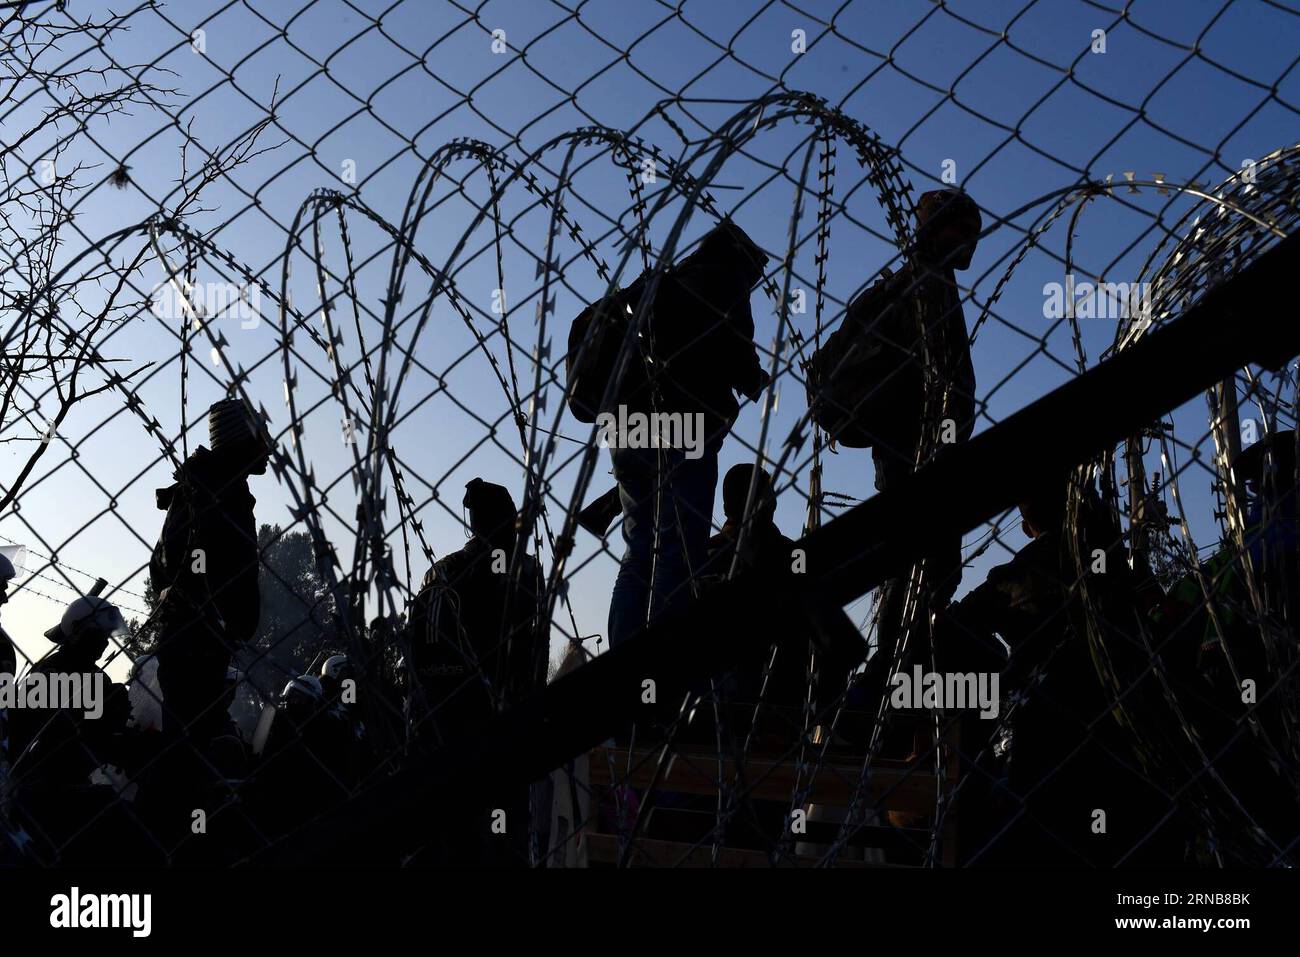 Afghan migrants protest and stand behind the wire fencing at the closed Greek-Macedonian border, near the Macedonian city of Gevgelija on Feb. 23, 2016. Macedonia has confirmed that it only allowed Syrian and Iraqi refugees through, matching a decision by its northern neighbor, Serbia. Around 5,000 migrants were waiting at the border wishing to continue their journey across Macedonia, Serbia, Croatia, Slovenia and then Austria, with Germany the final goal for most. MACEDONIA-GEVGELJA-MIGRANTS Biljana, PUBLICATIONxNOTxINxCHN   Afghan Migrants Protest and stand behind The Wire fencing AT The Clo Stock Photo